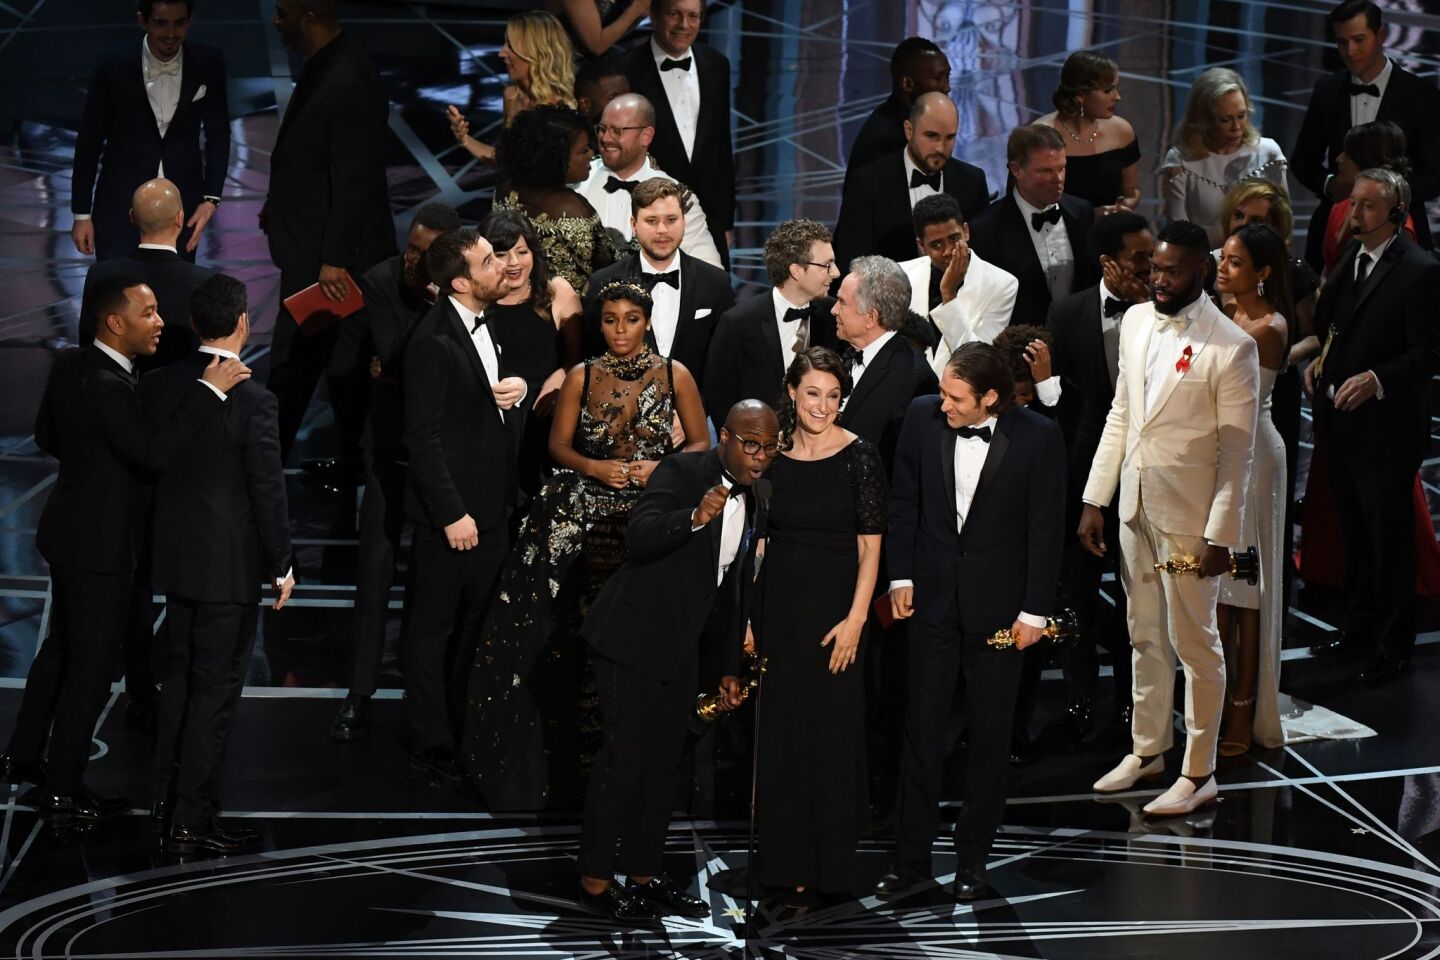 Cast and crew of both "Moonlight" and "La La Land" are onstage.